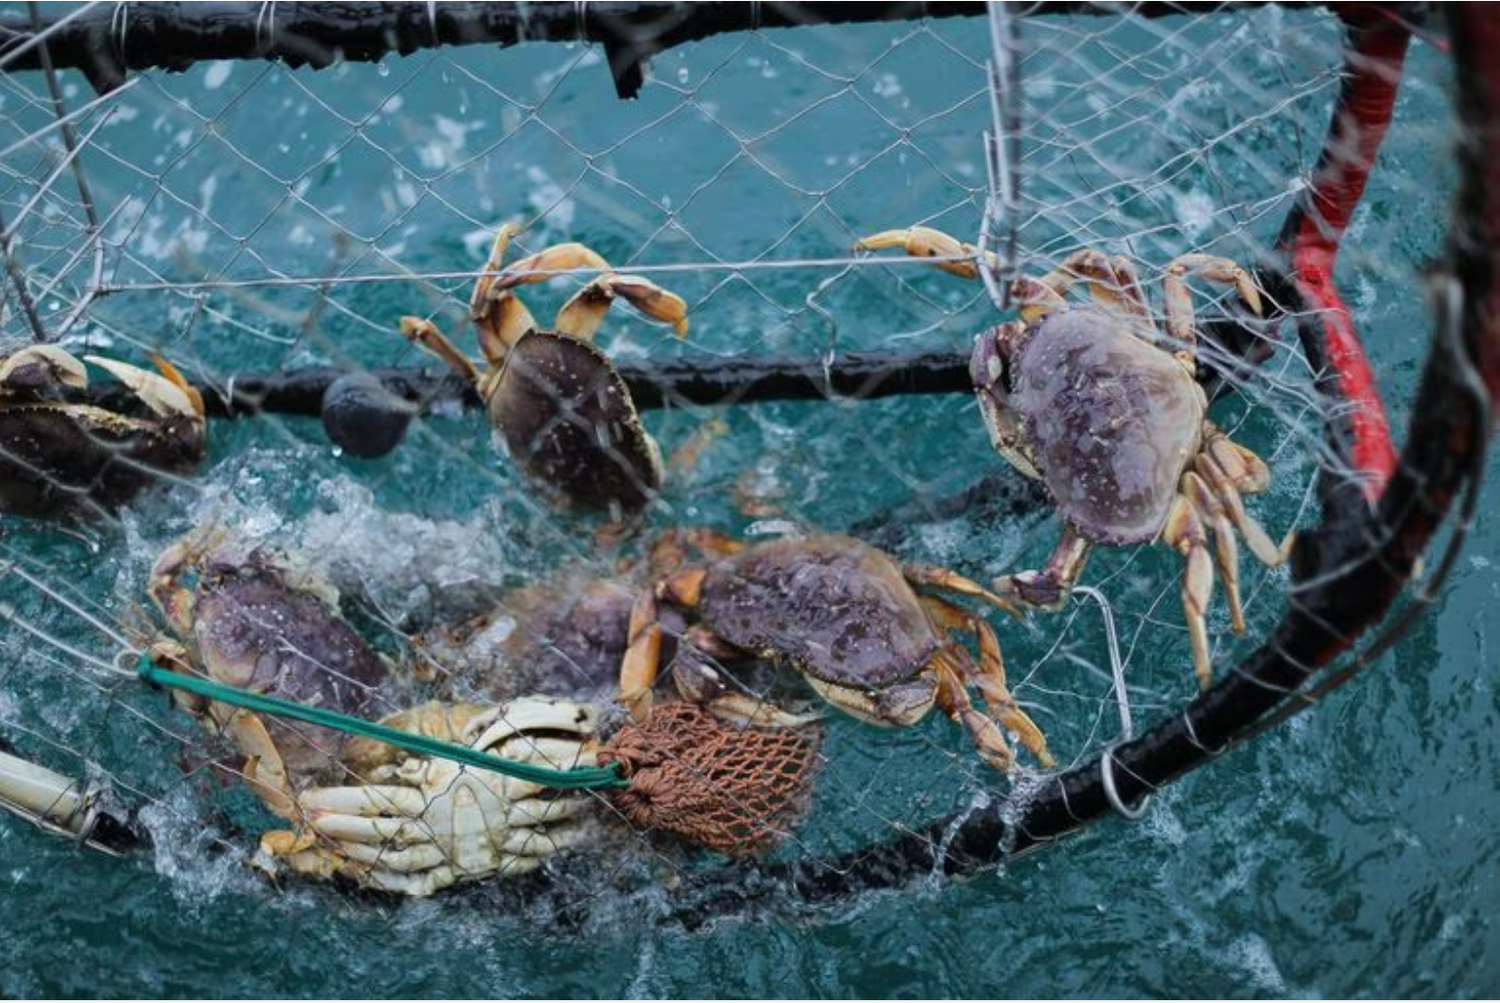 Oregon Extends Crab Fishing Rules to Protect Whales from Trap Rope Dangers